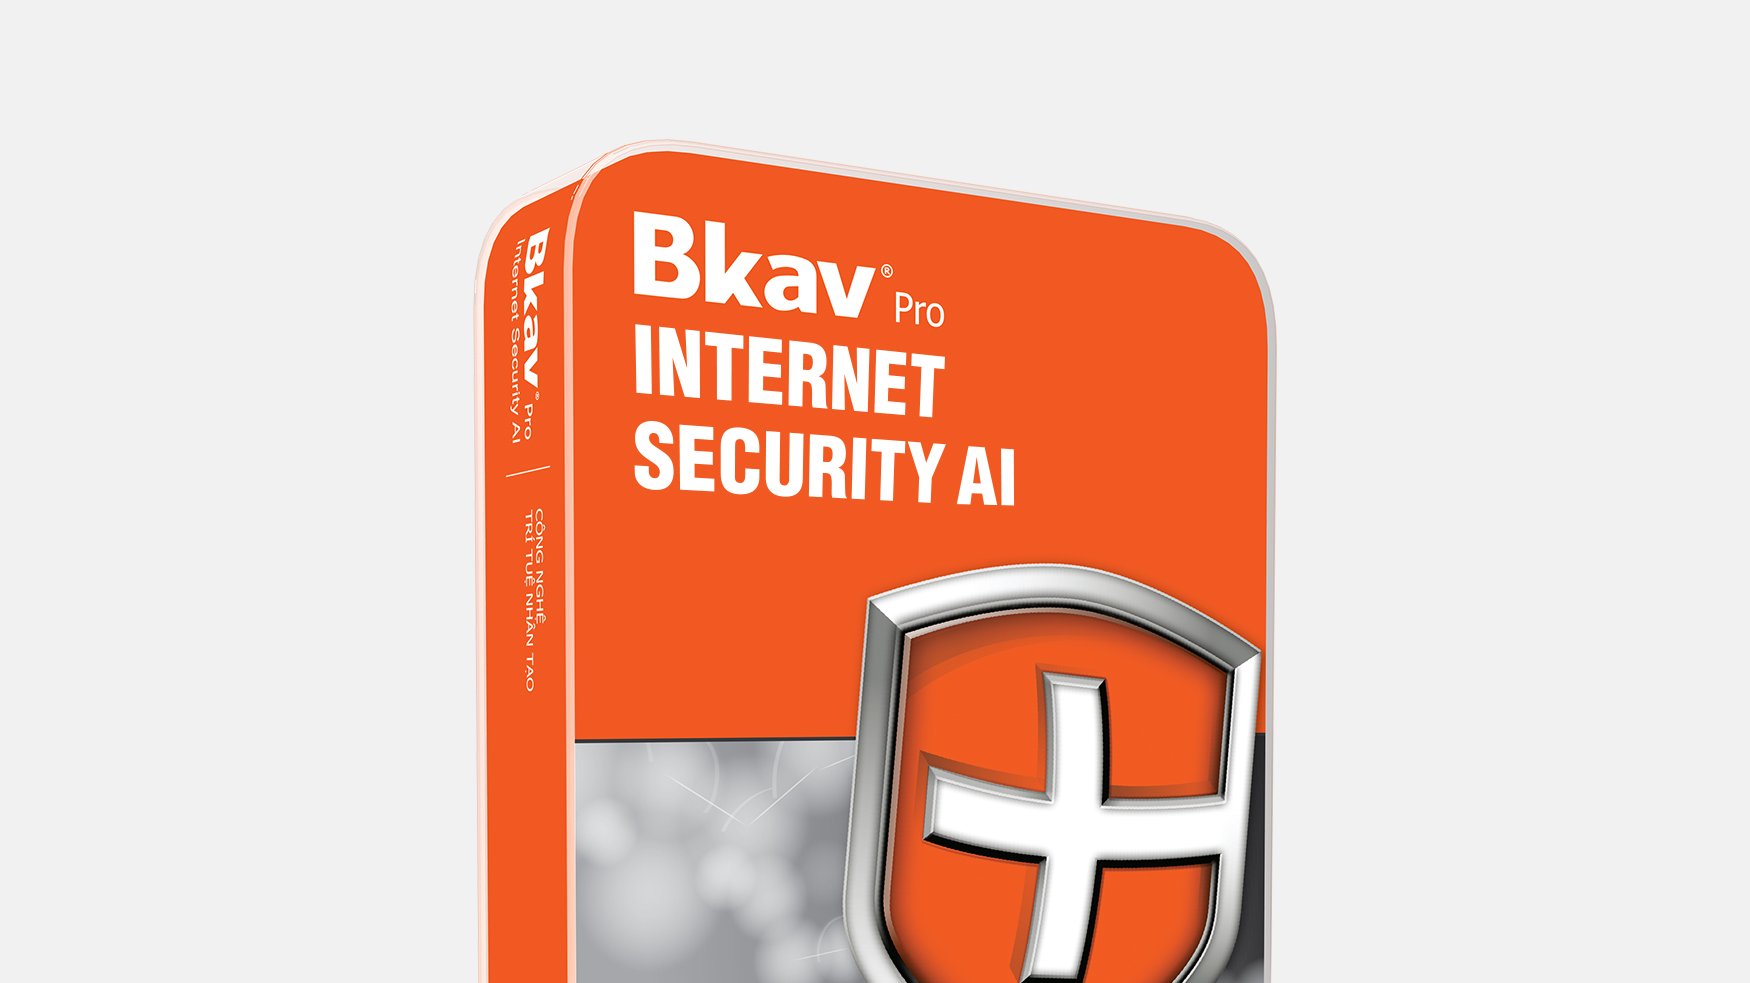 System Optimization: Bkav Home.exe offers additional features to help optimize your computer's performance.
Technical Support: Access reliable technical support for any issues or questions regarding Bkav Home.exe.